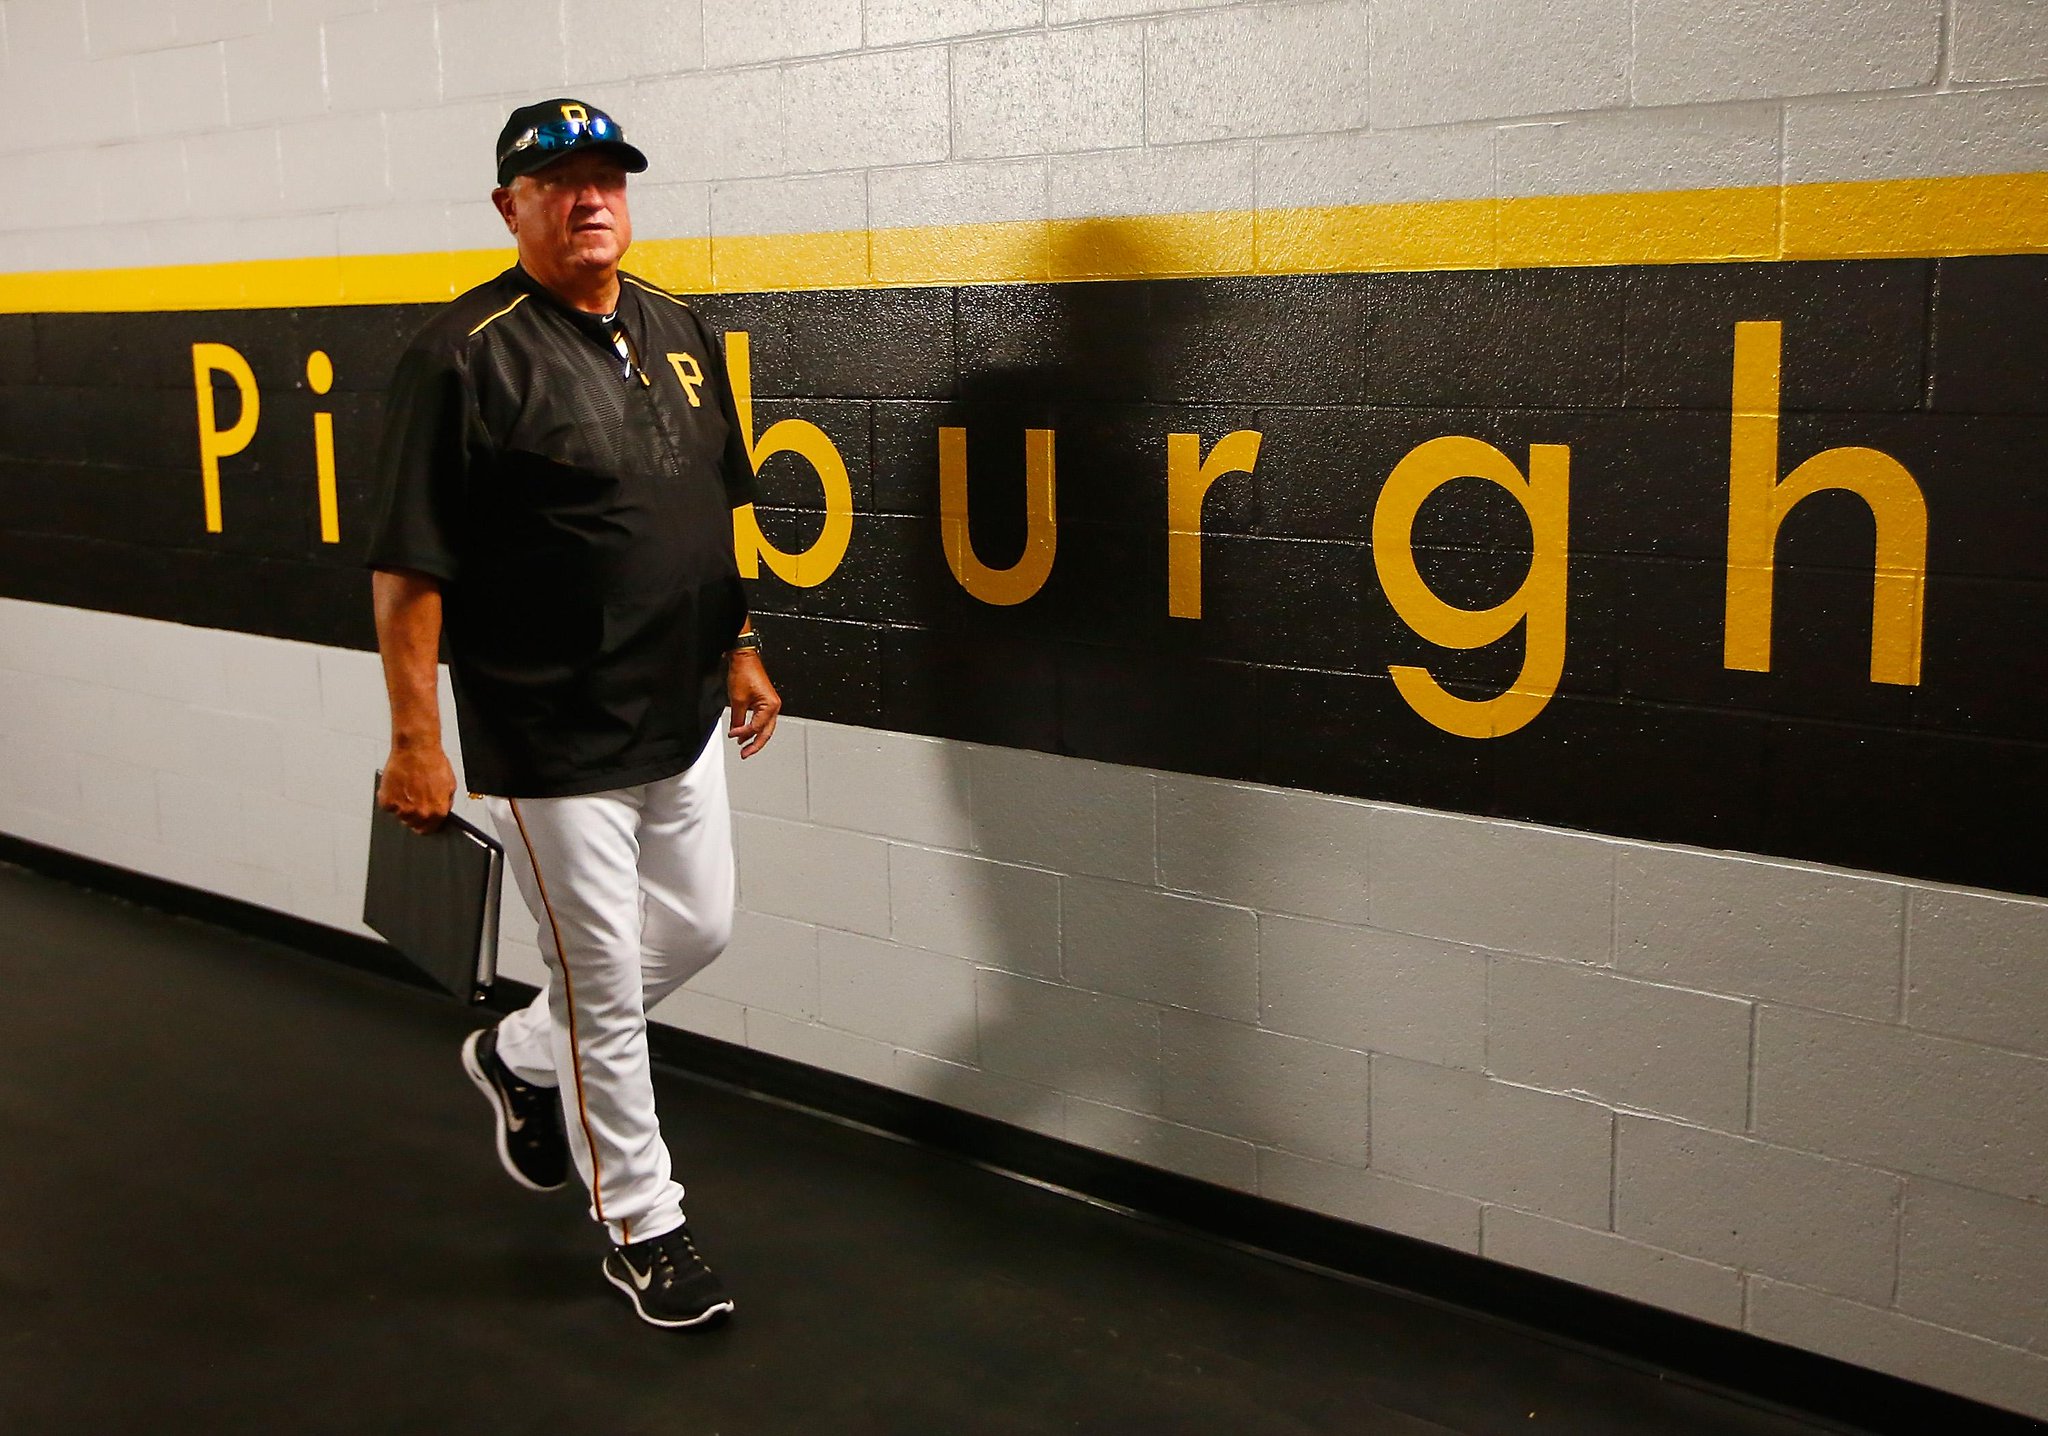  -- join us in wishing skipper Clint Hurdle a HAPPY 58th BIRTHDAY!  